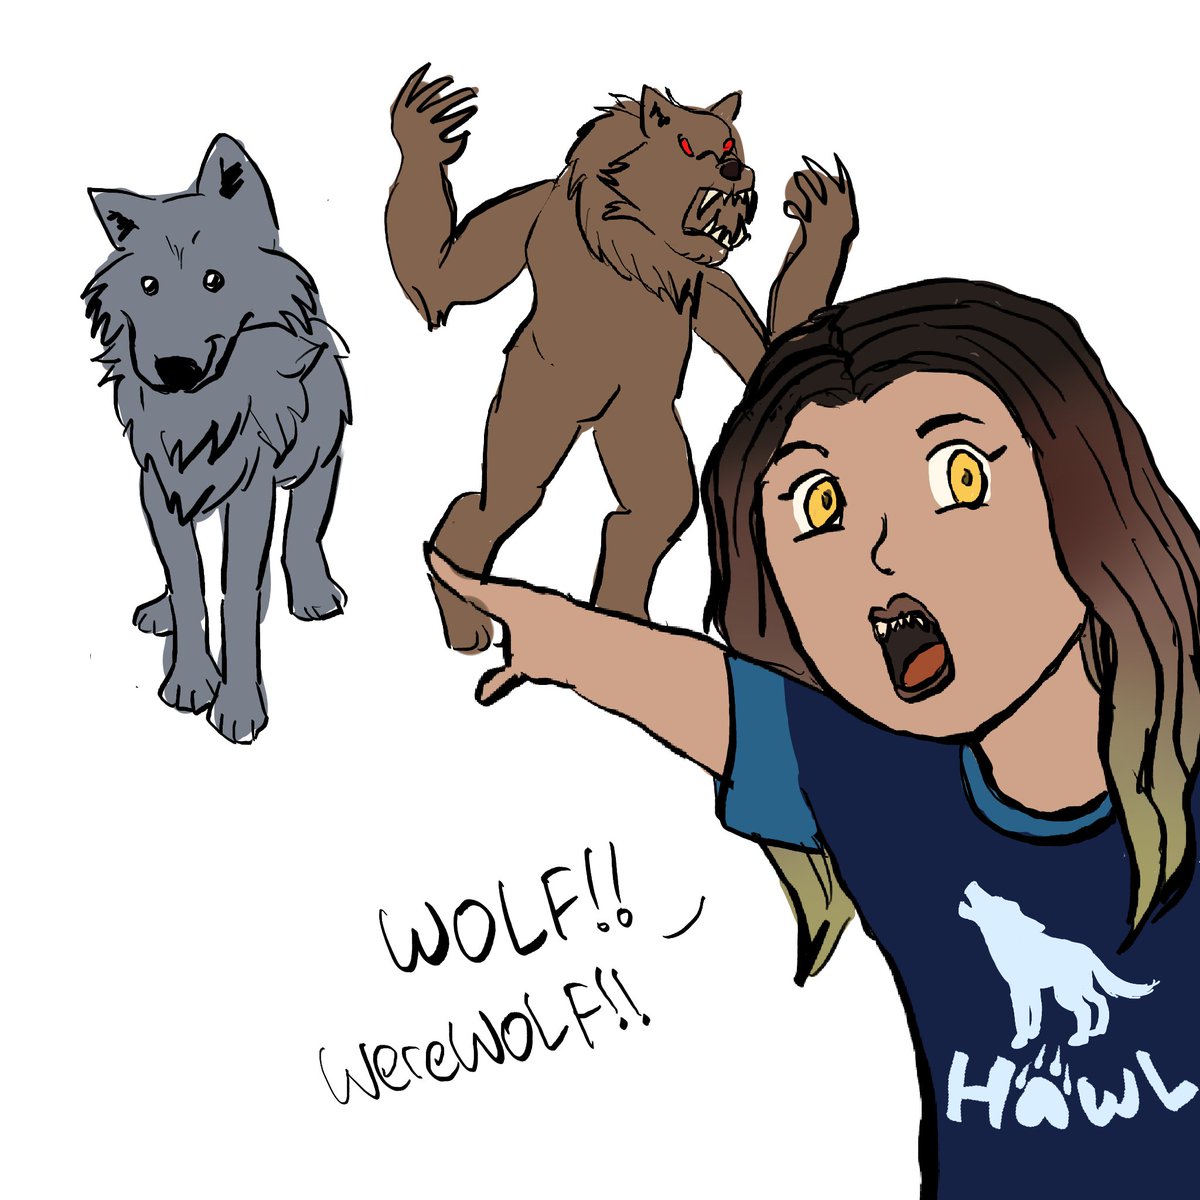 thank you wolves and werewolves for being part of my life, I want to see an actual wolf irl before I d/ e